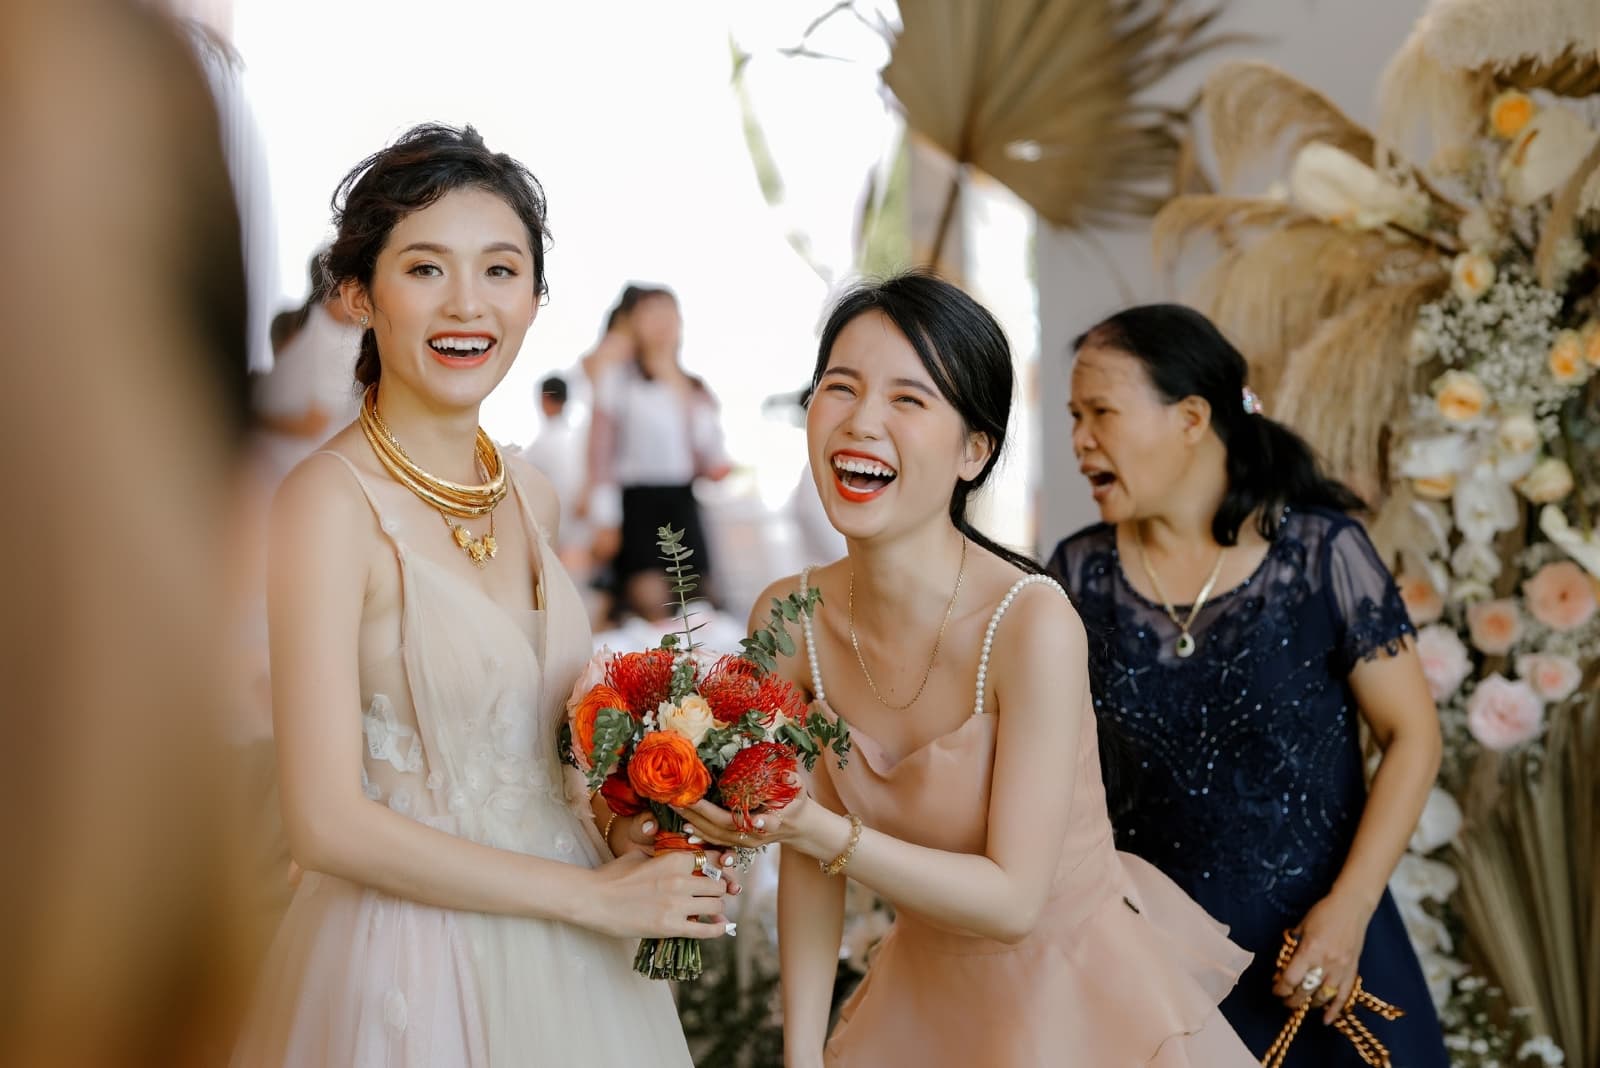 bridesmaid laughing while standing near bride